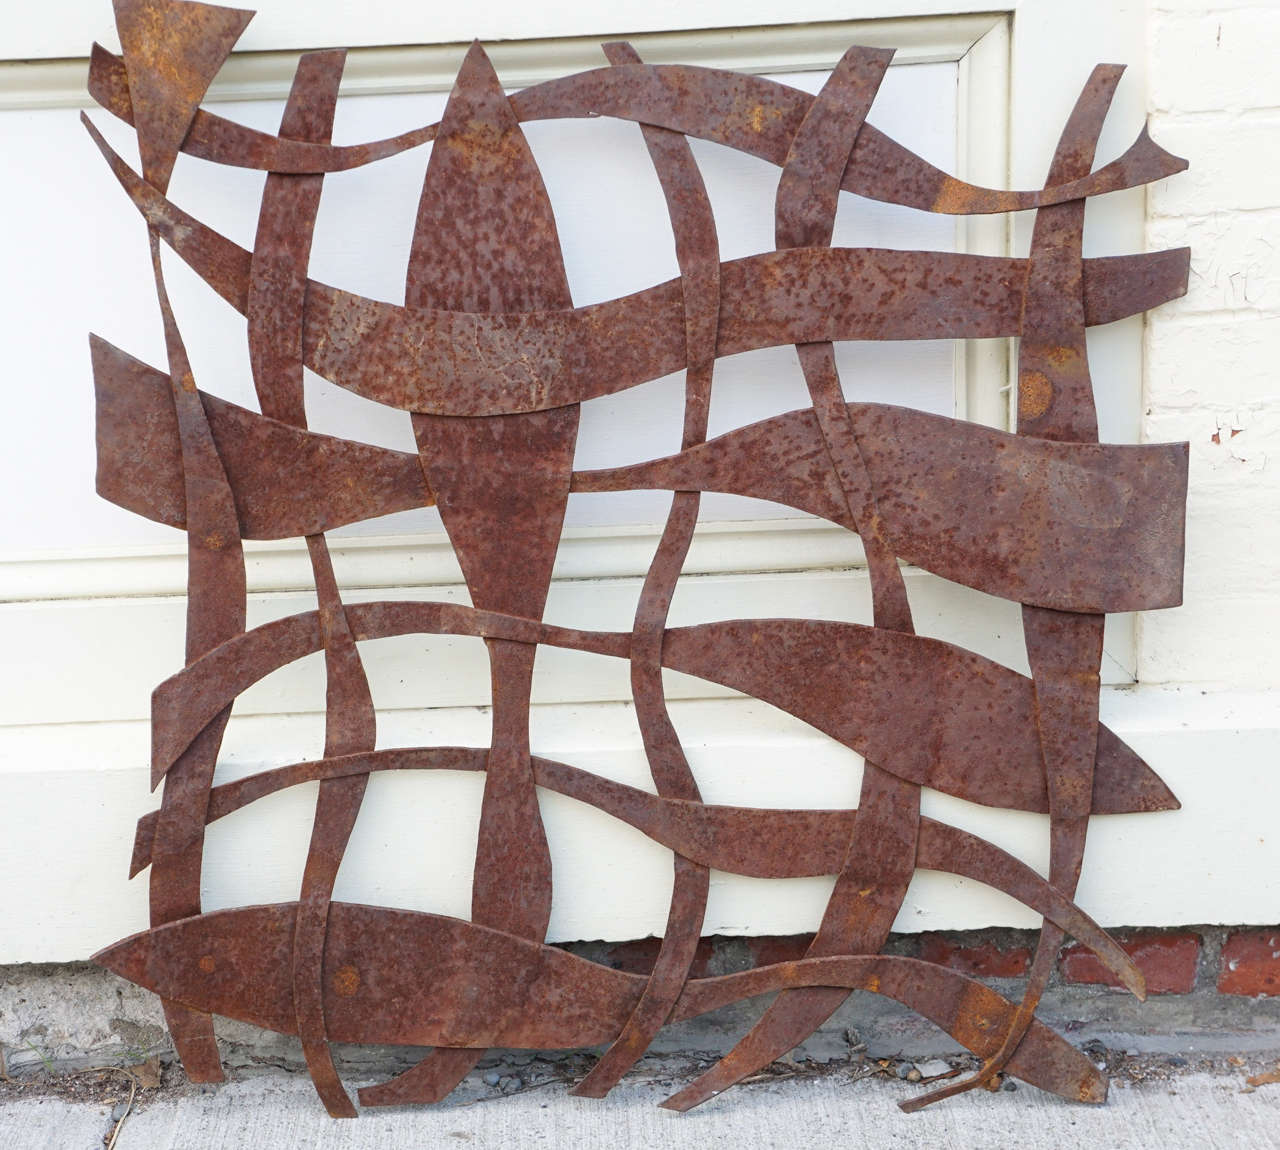 Abstract sculpture, wrought iron wall hanging, circa 1980, Woodstock, NY, Matthew Weinberger. 